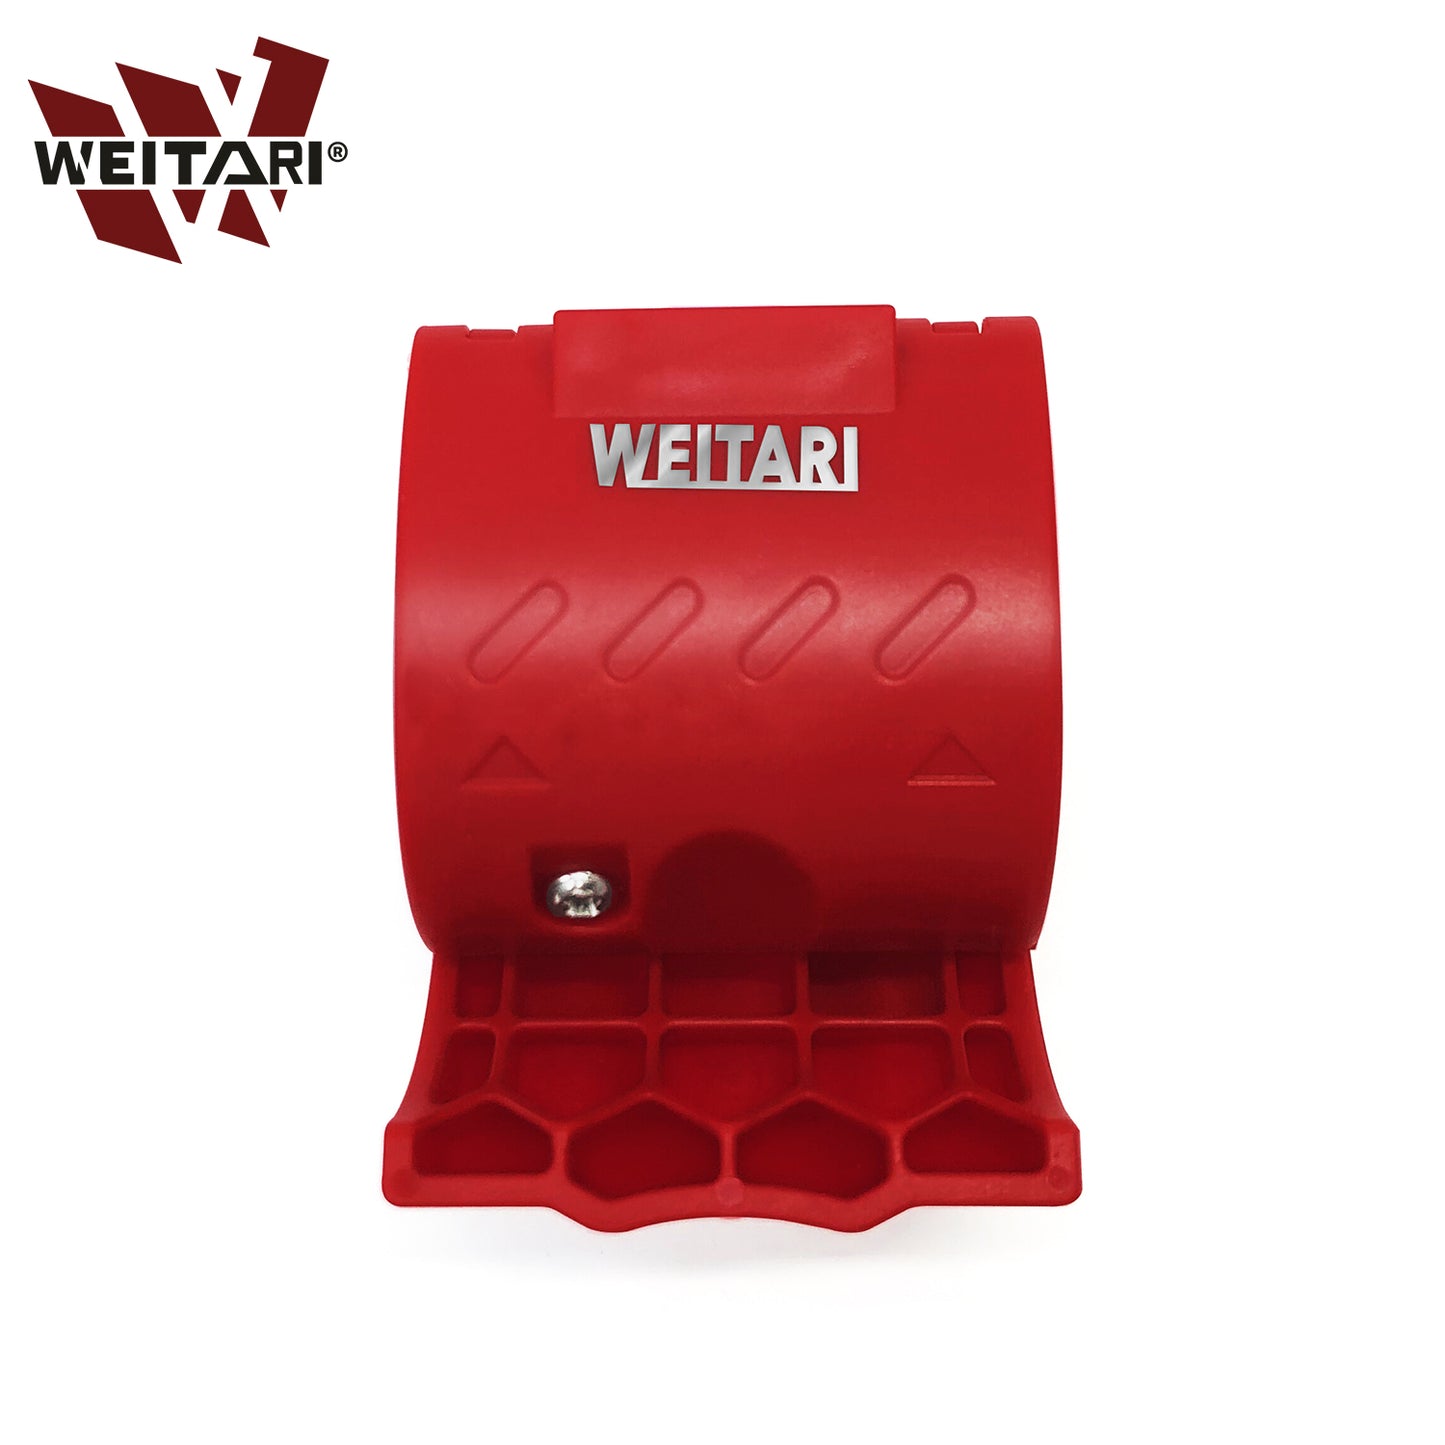 WEITARI® PVC pipe cutter tool Cutter for plastic pipes and sealing sleeves 20 – 50 mm